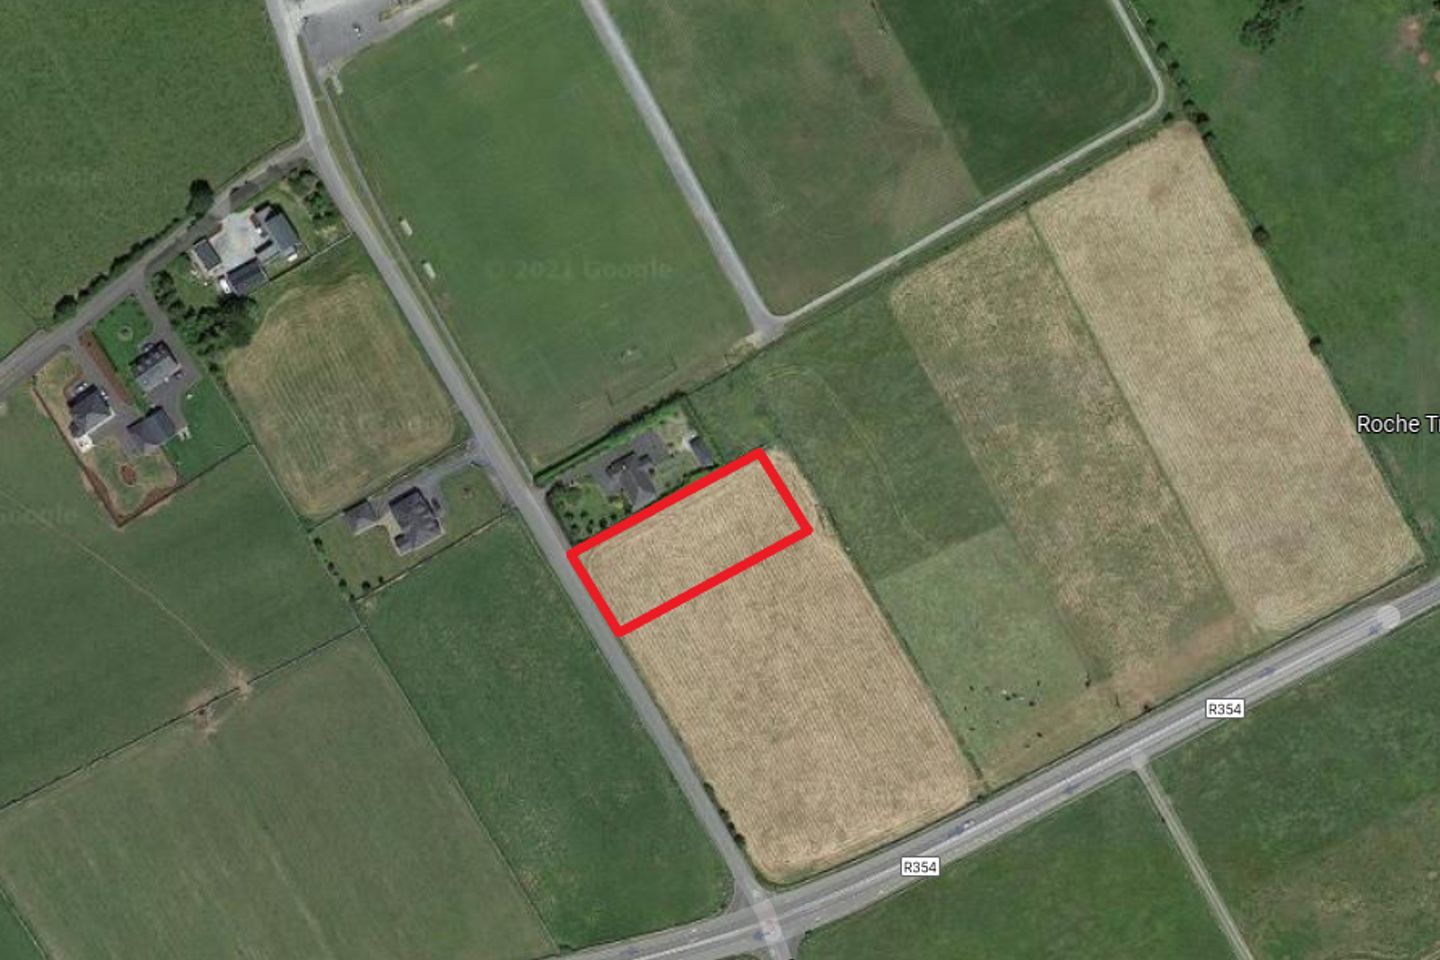 0.9 acre Site at Knockdoe, Claregalway, Co. Galway